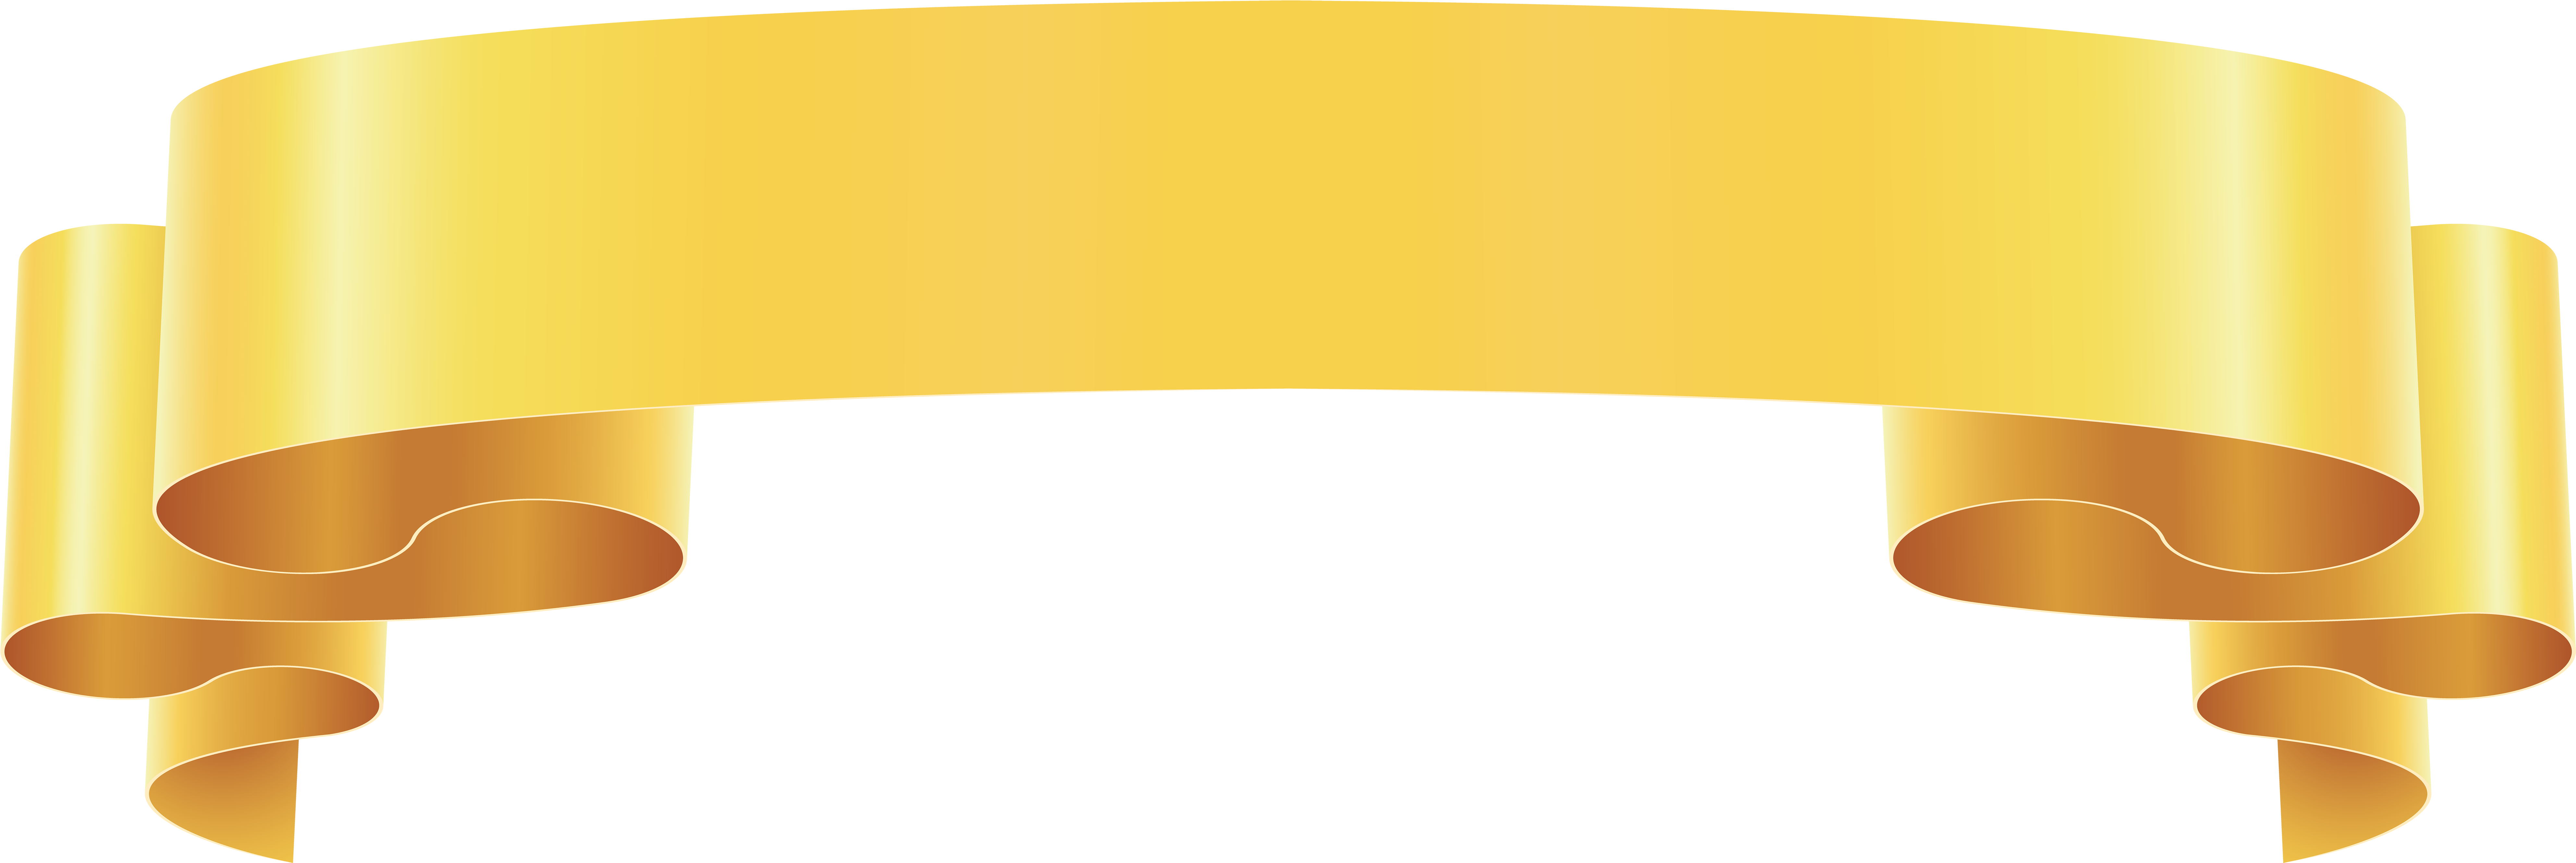 Yellow Banner Png - PNG Image Collection